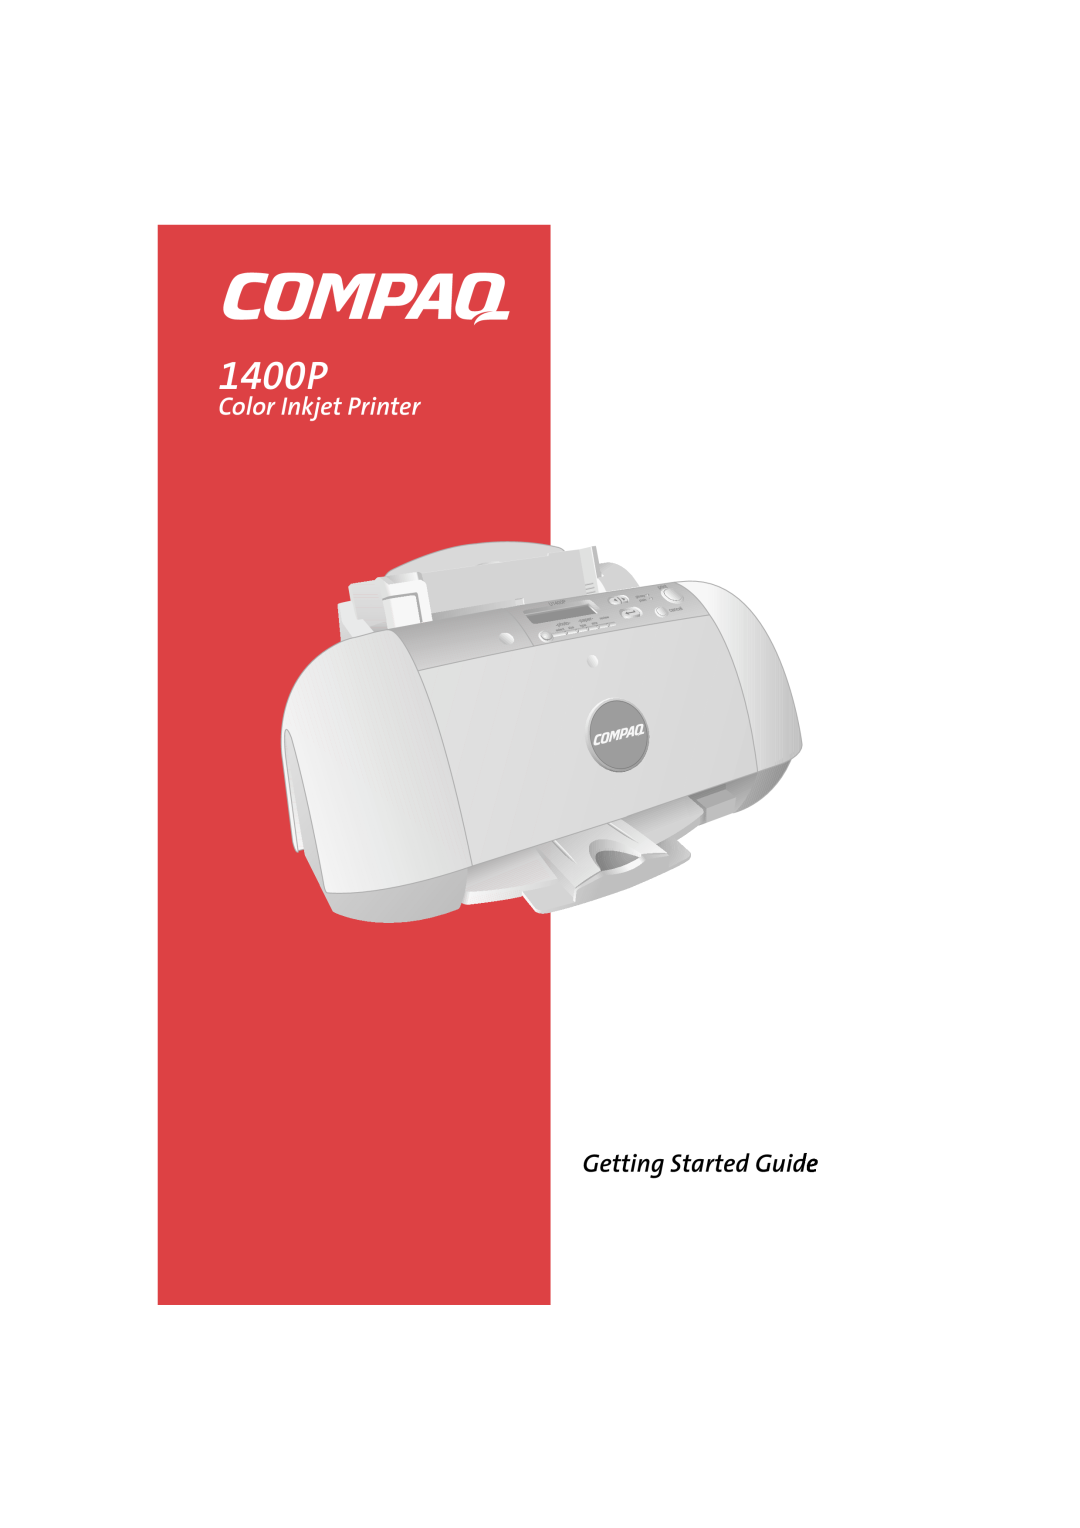 Compaq 1400P manual Color Inkjet Printer, Getting Started Guide 